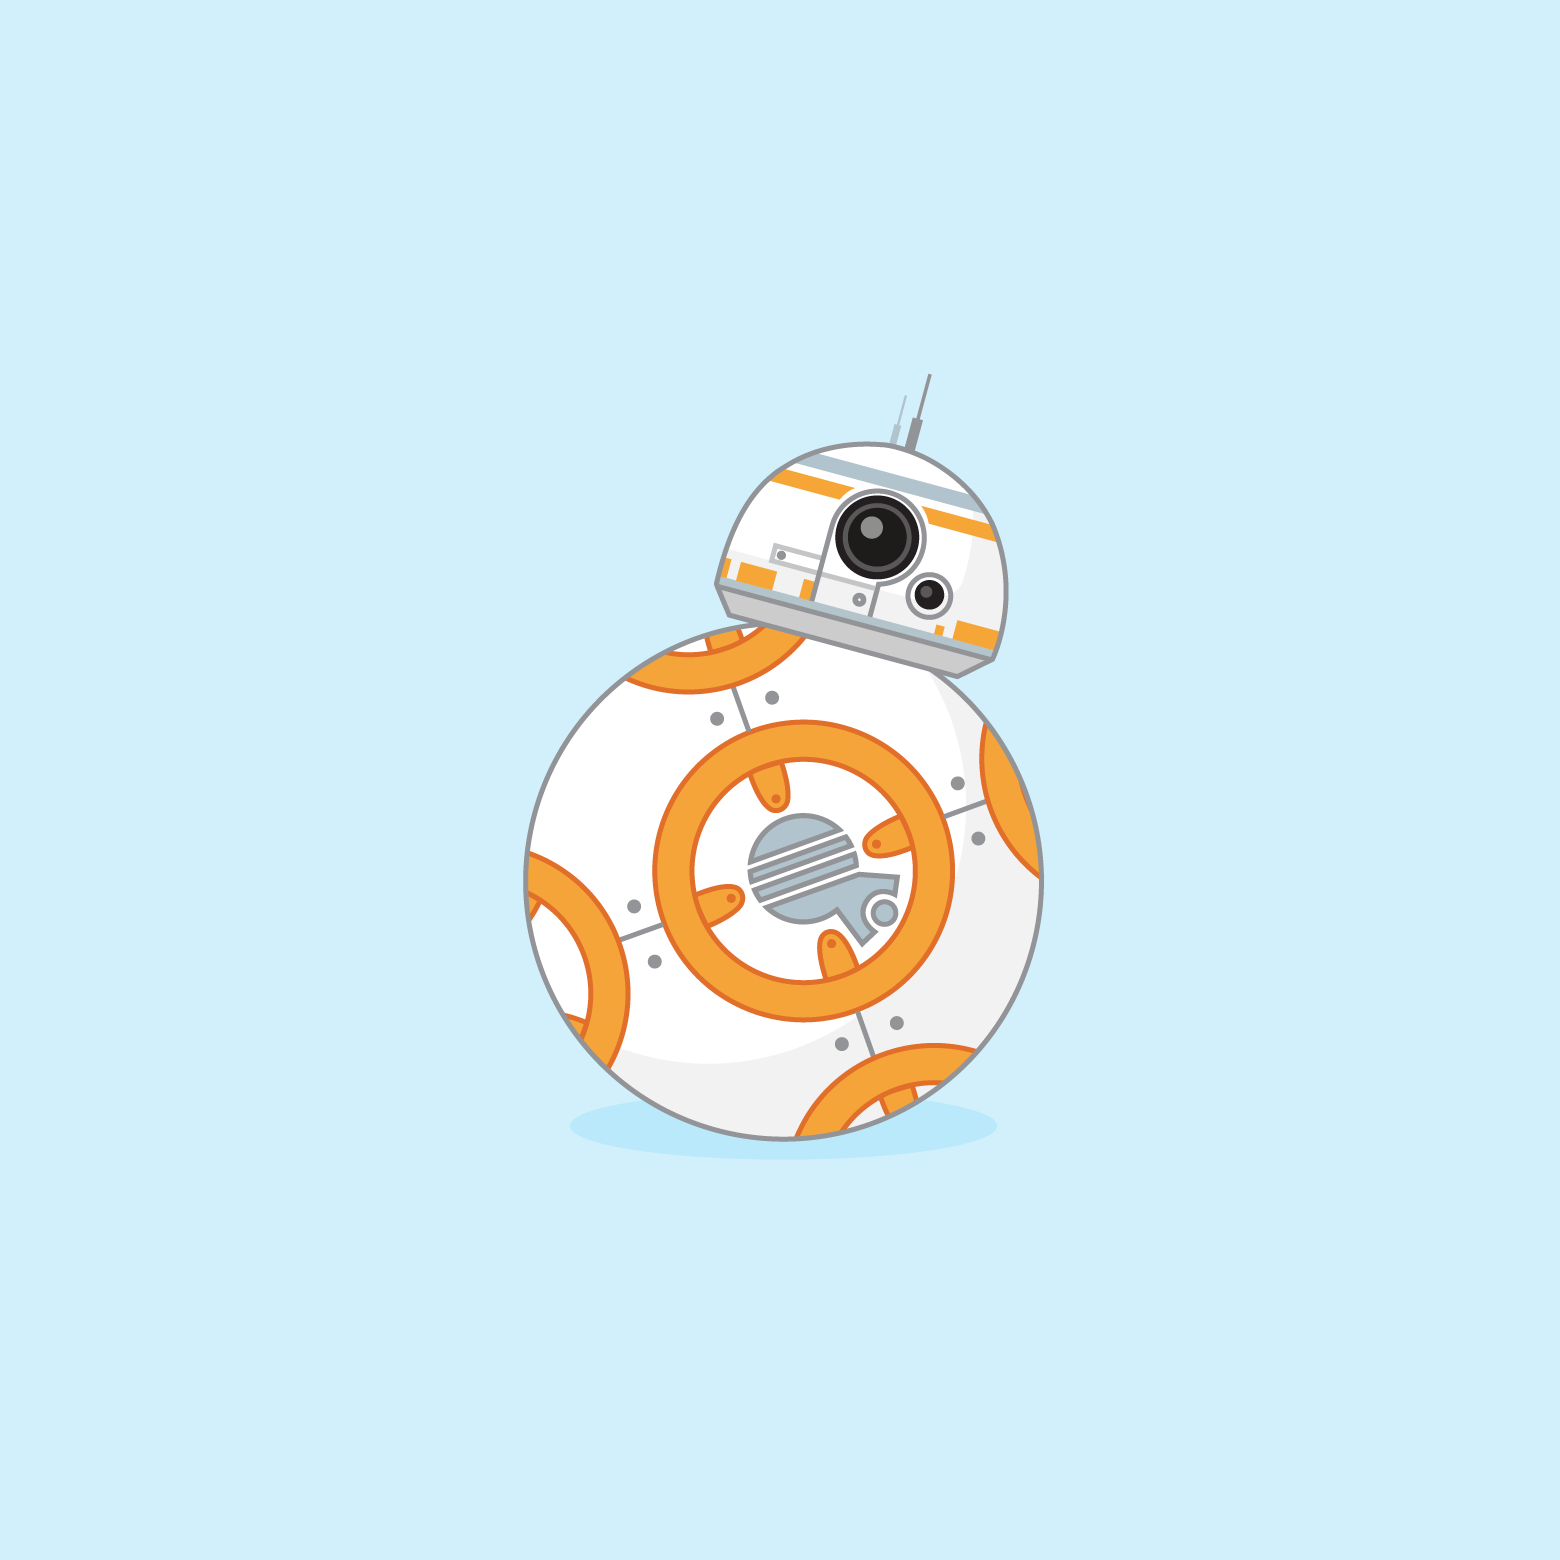 bb8.png